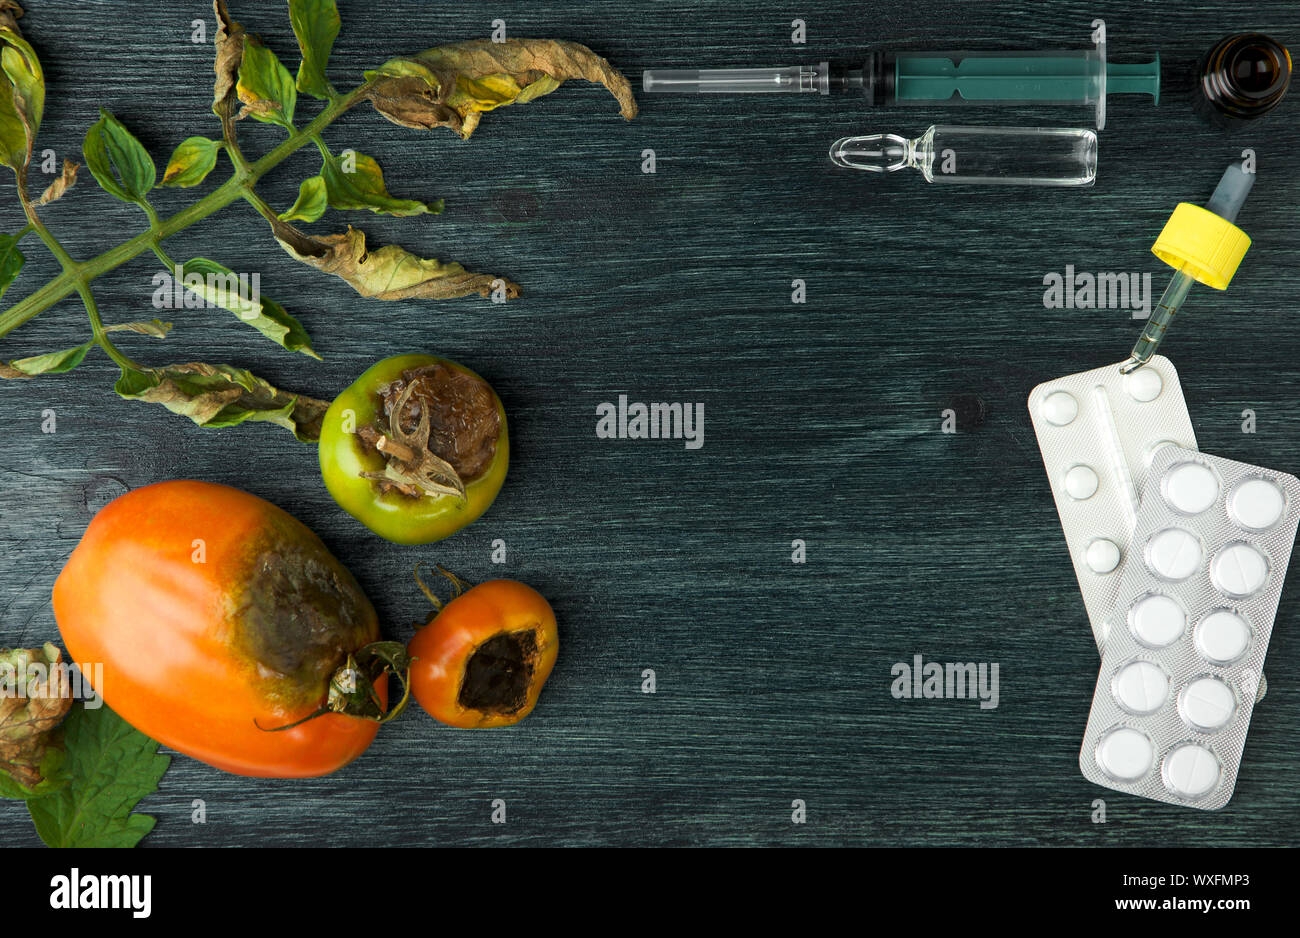 VEGETABLES ON BACKGROUND. SICK VEGETABLES ON A WOODEN SURFACE. COPY SPACE Stock Photo